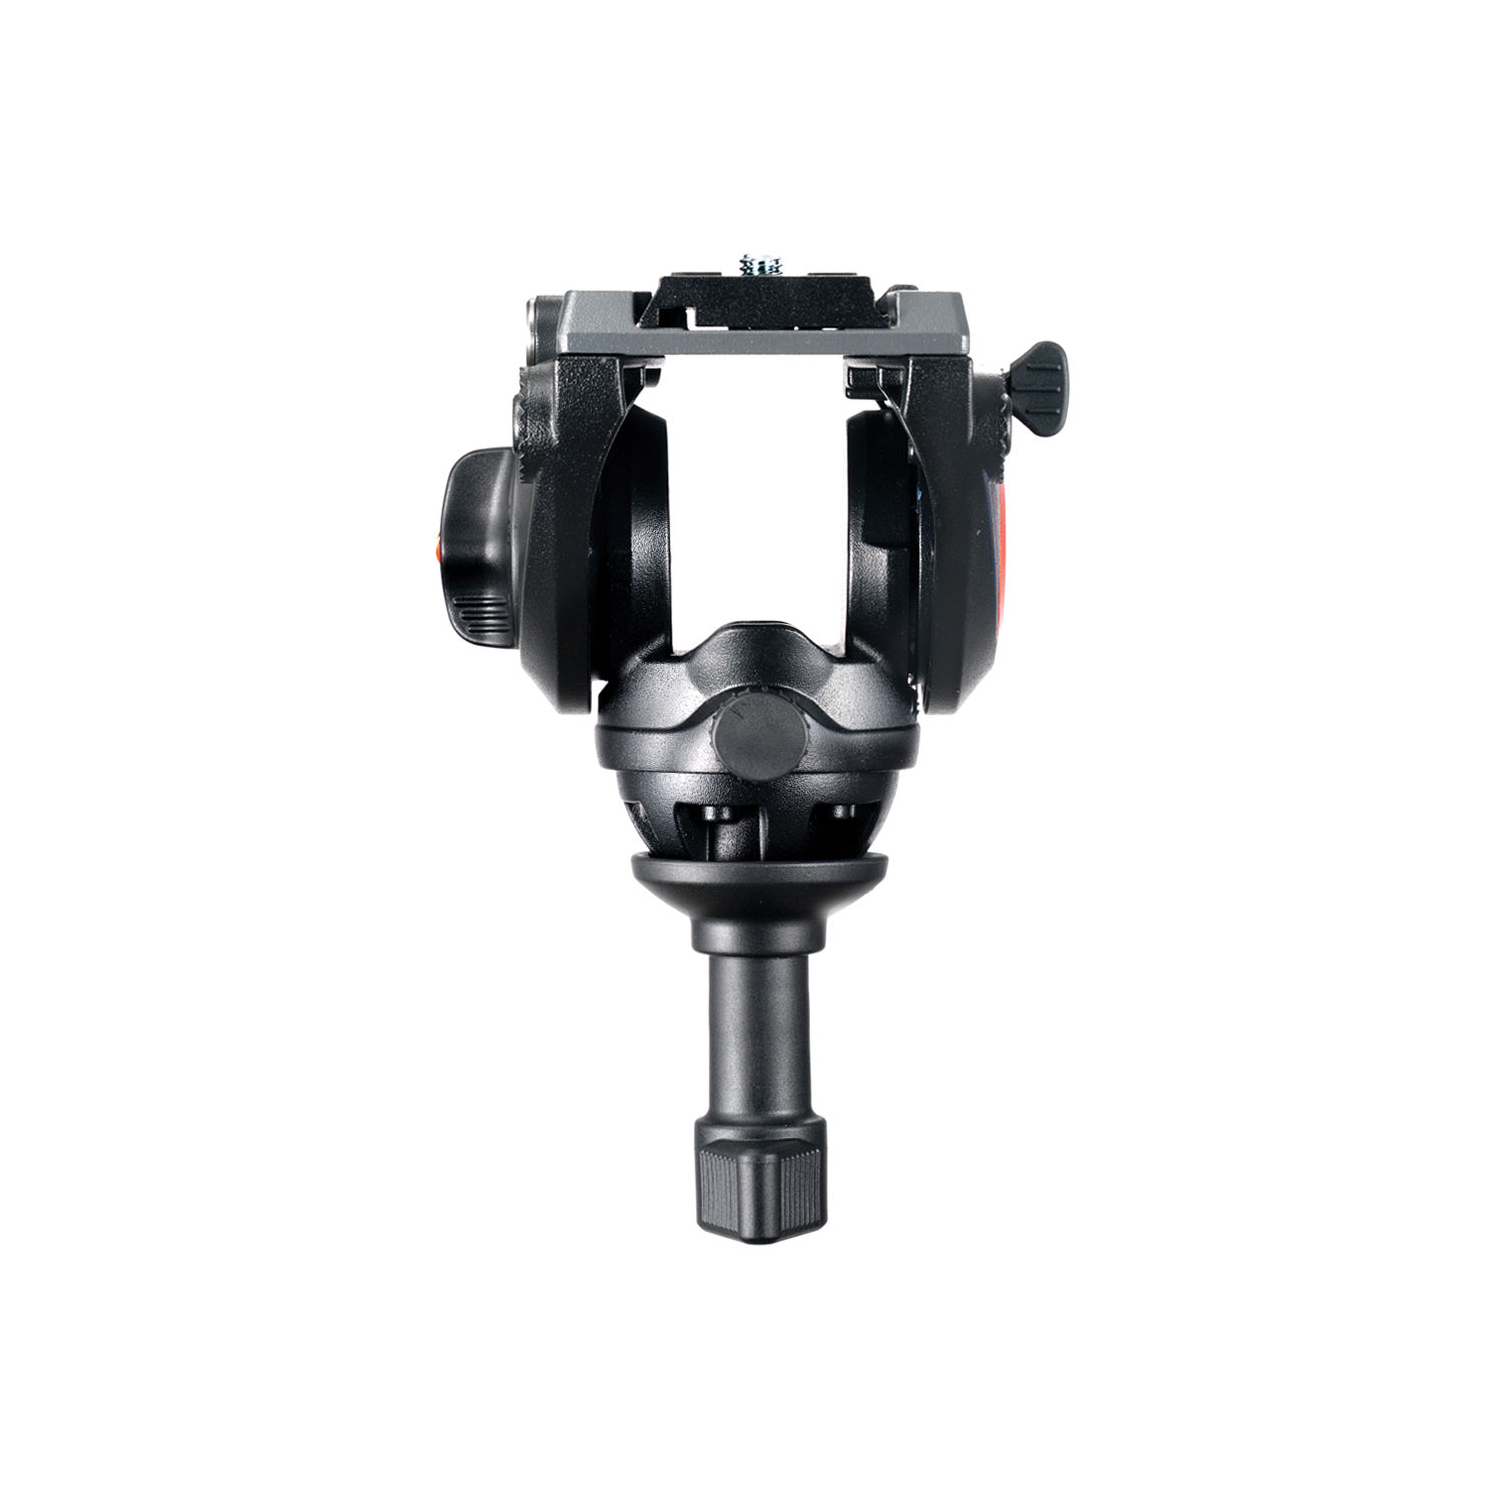 Manfrotto MVH500A Fluid Drag Video Head with MVT502AM Tripod and Carry Bag